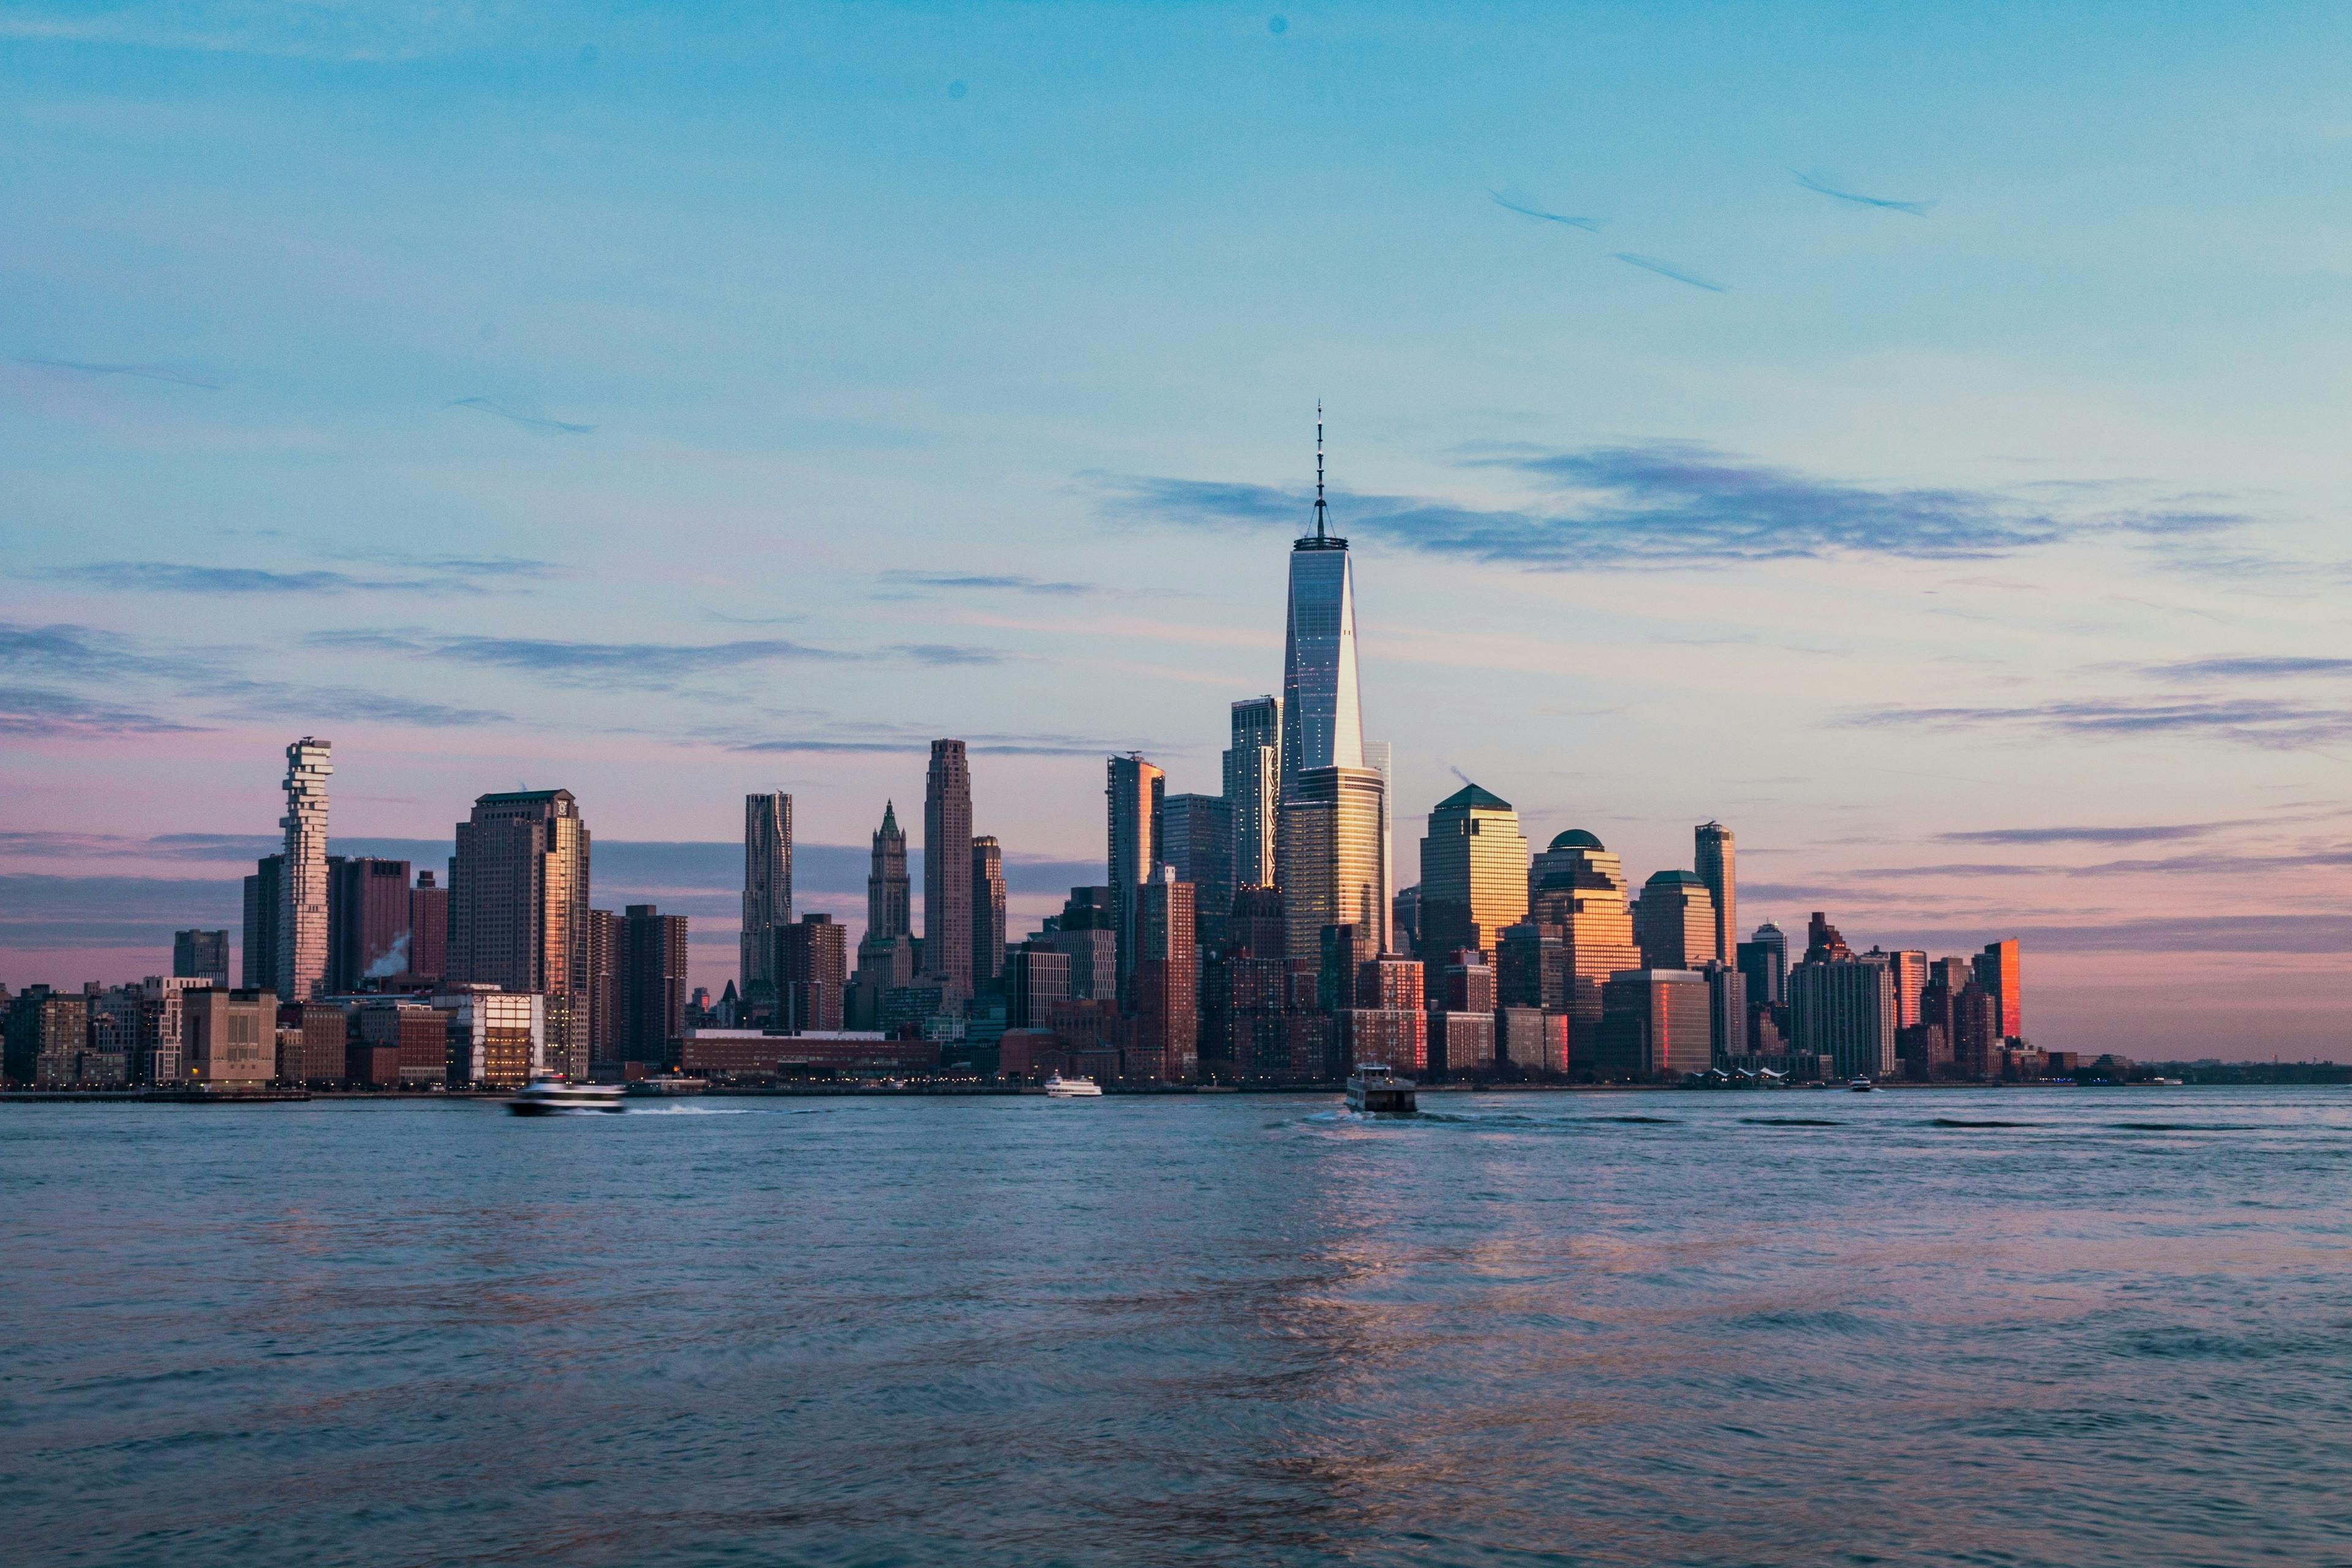 This image captures a serene view of the New York City skyline during sunset. The sky is painted with soft pink and blue hues, providing a picturesque backdrop to the iconic skyscrapers, including the One World Trade Center. The river in the foreground reflects some of the colors of the sky, enhancing the overall tranquility of the scene. Small boats can be seen on the water, adding a dynamic element to the peaceful landscape. This image highlights the beauty of the city's architecture contrasted with the natural elements of the sky and water during the golden hour.